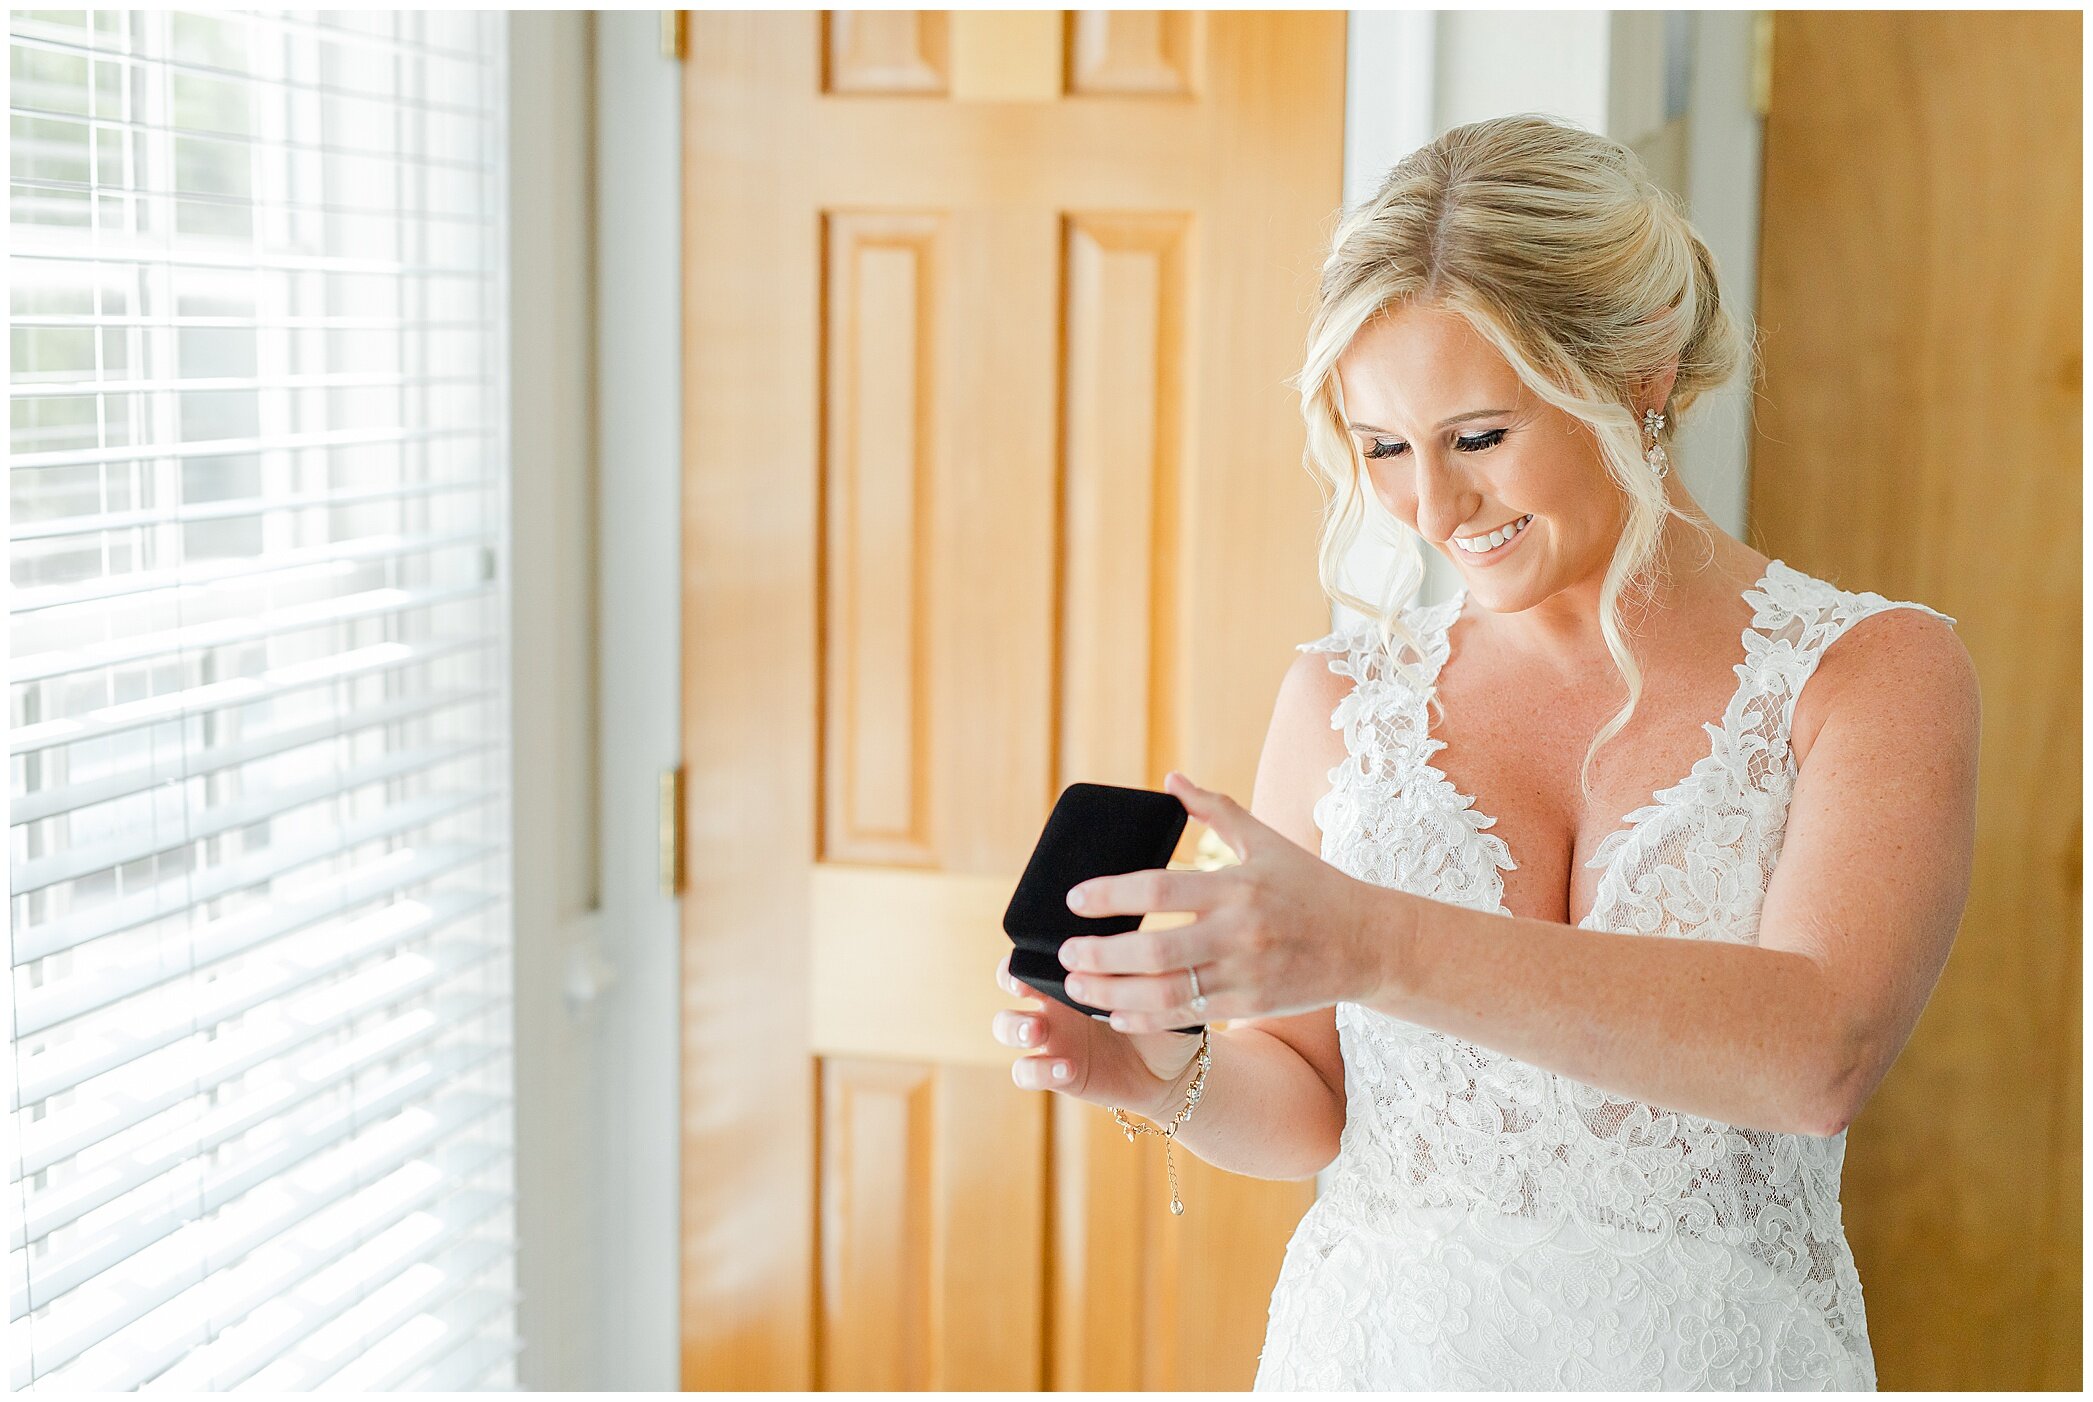 bride opens gift from groom on wedding day